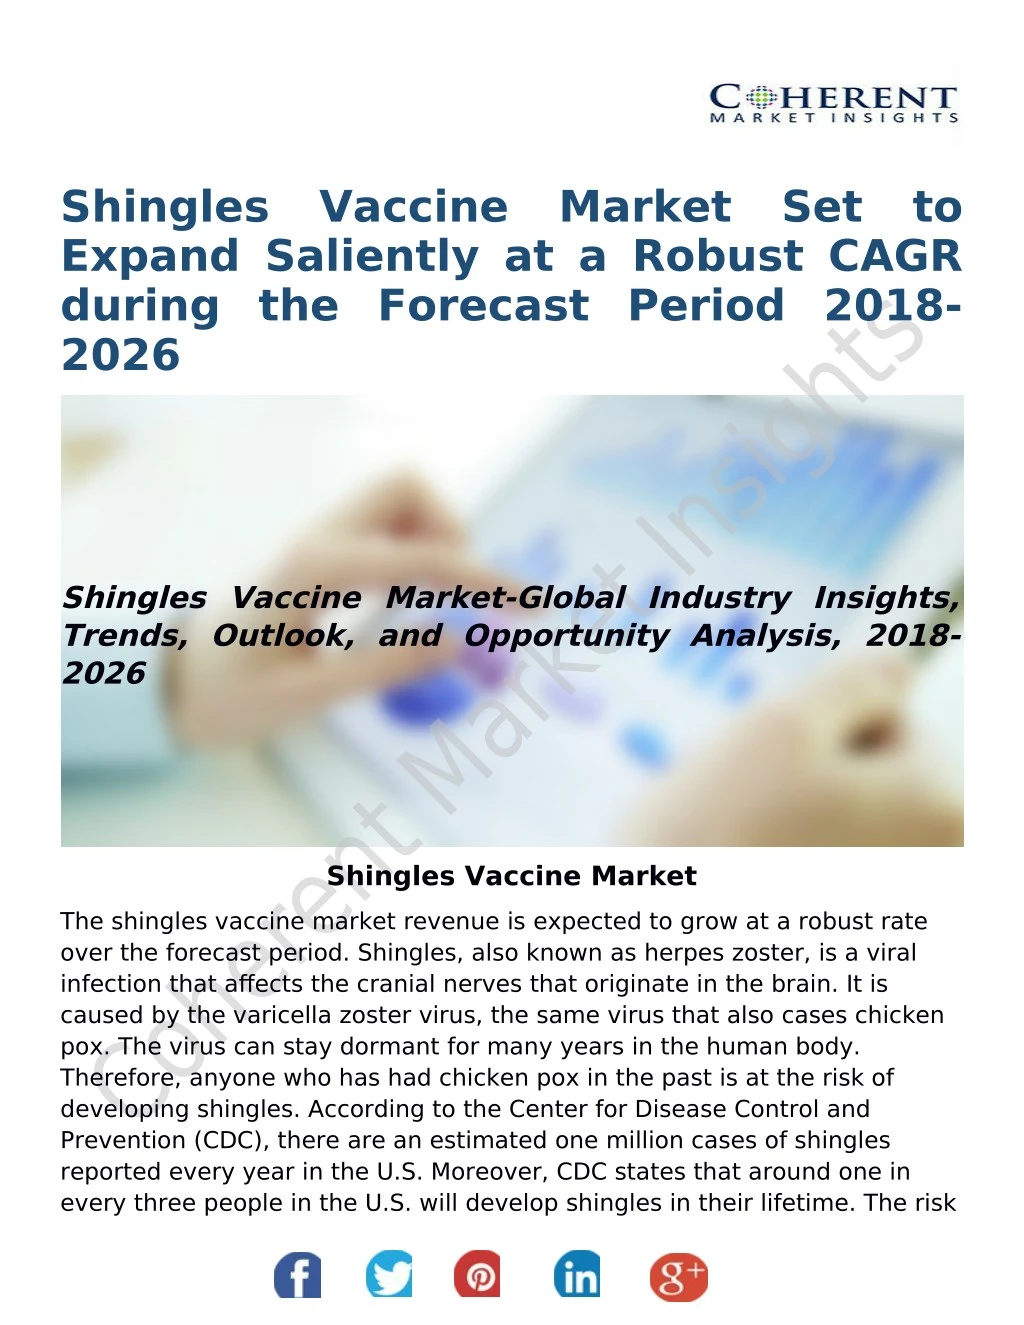 shingles vaccine market set to expand saliently